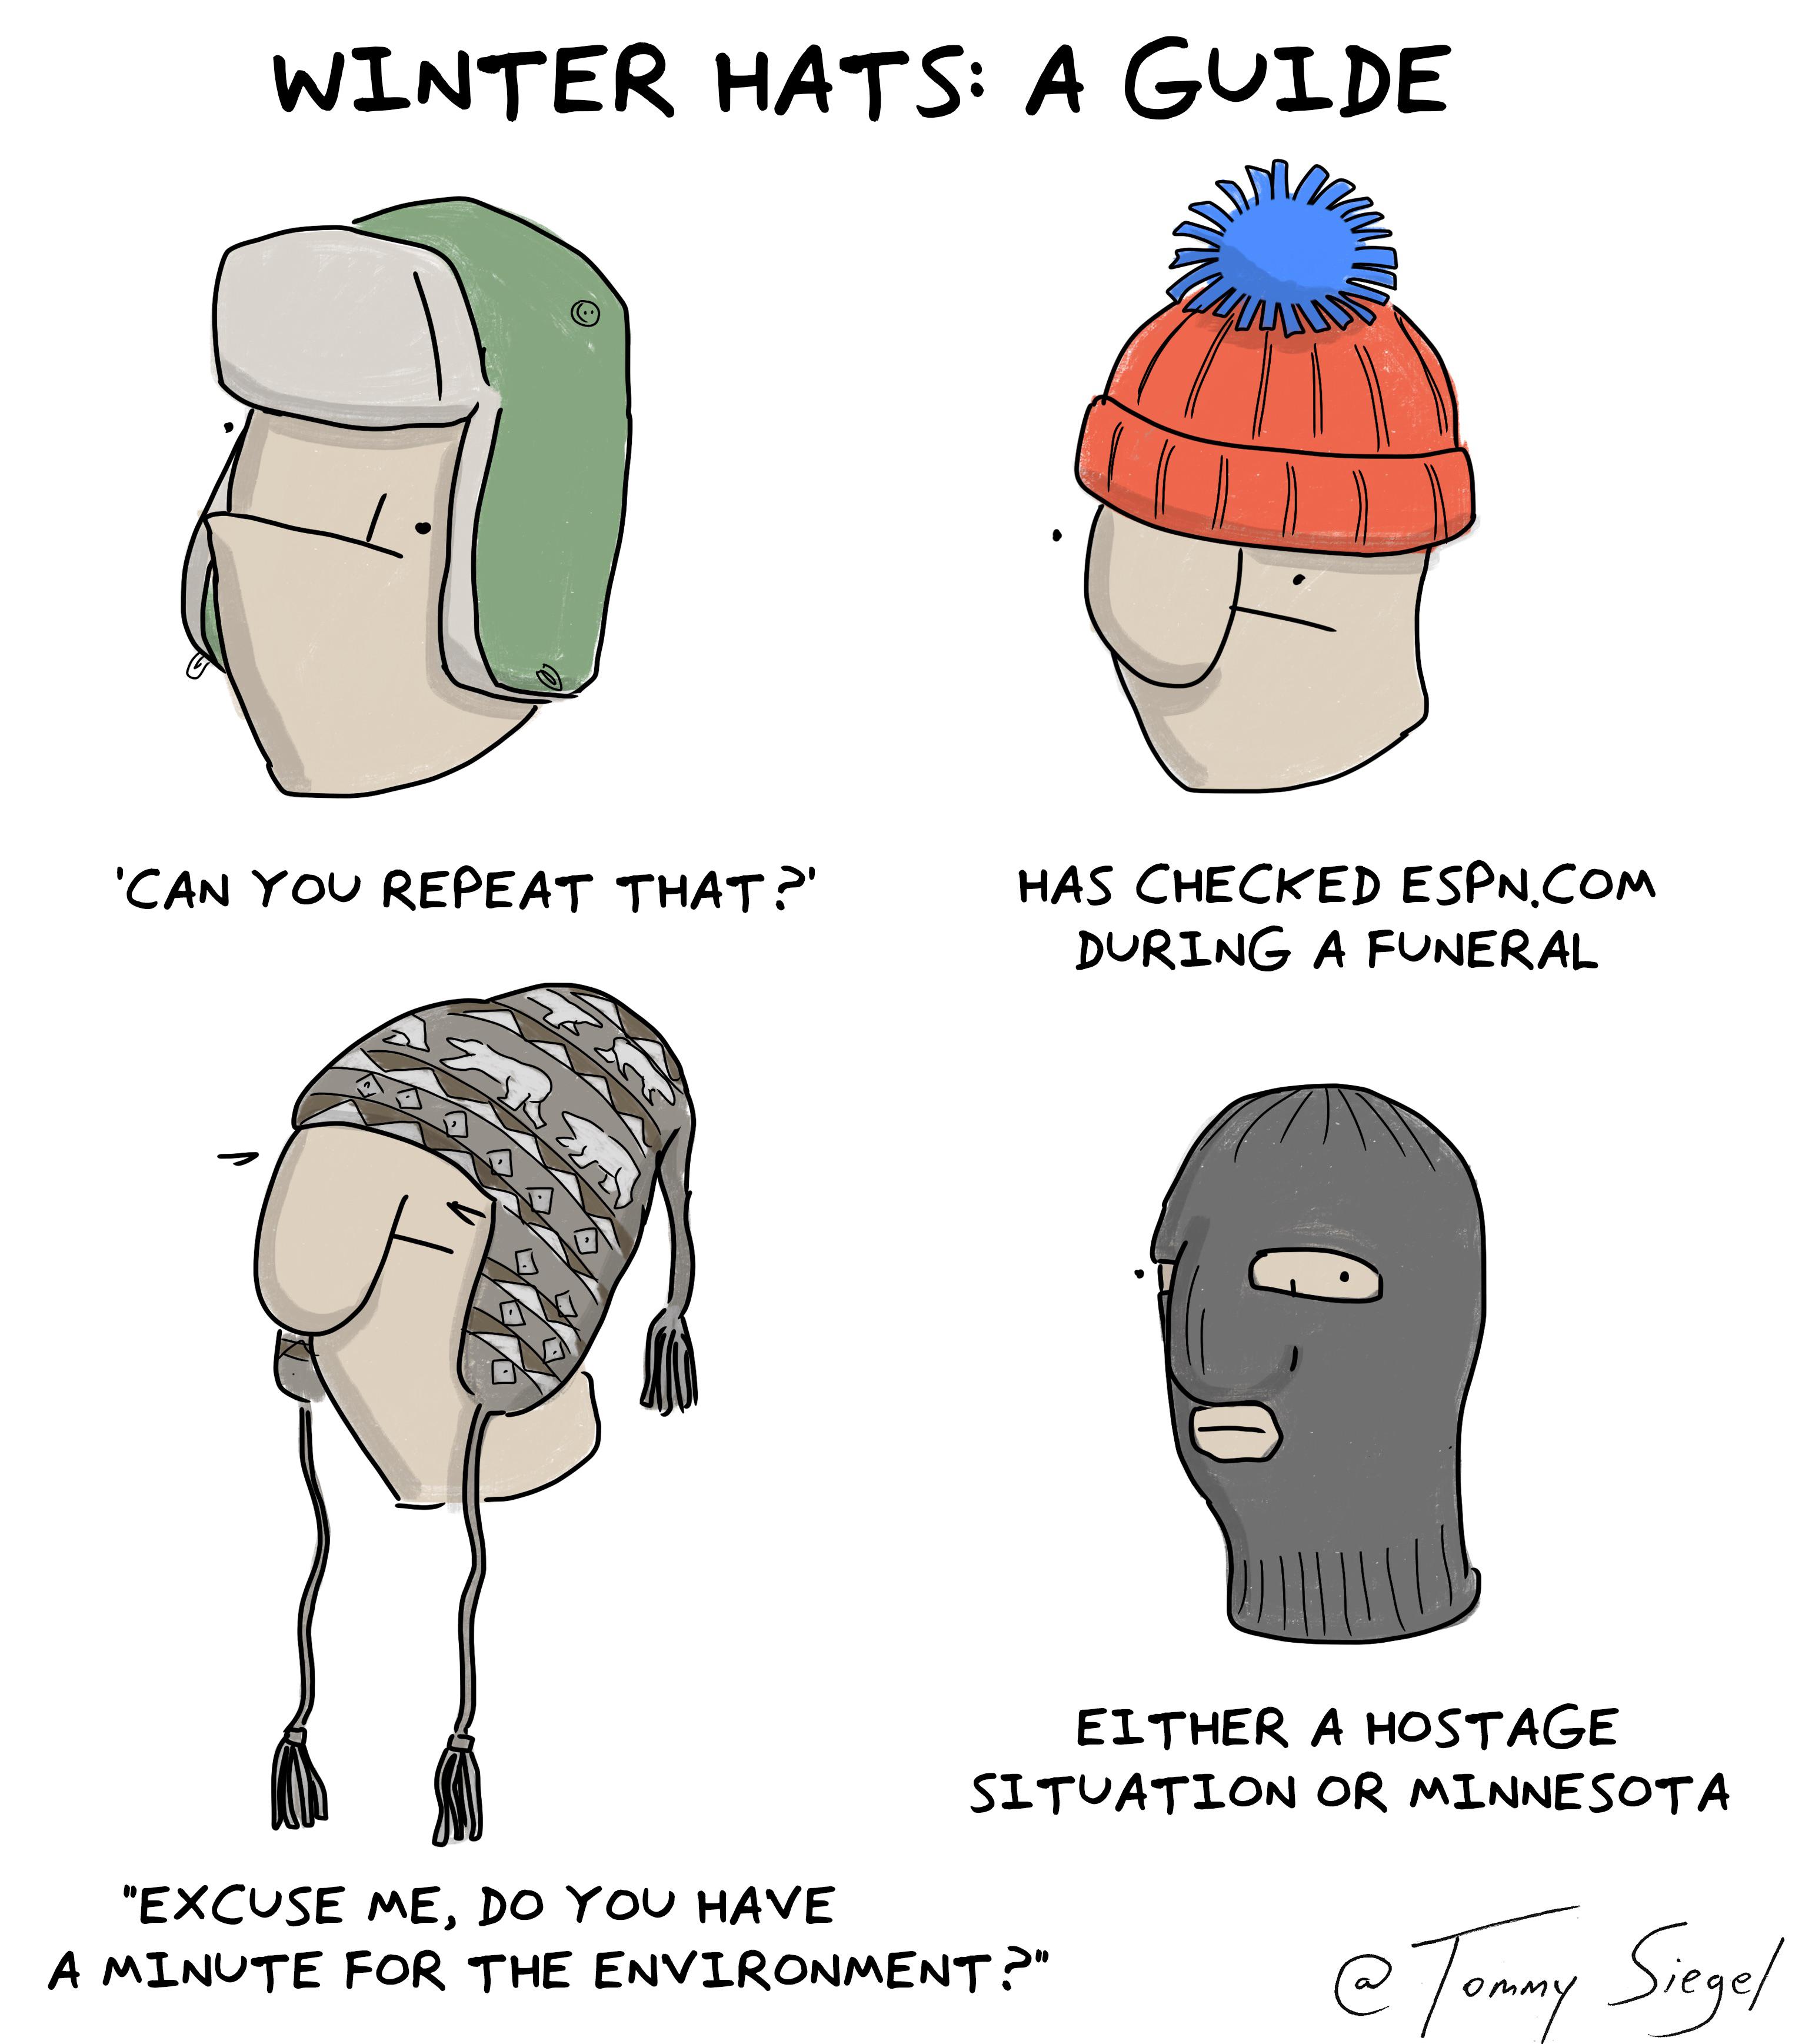 winter hats: a guide